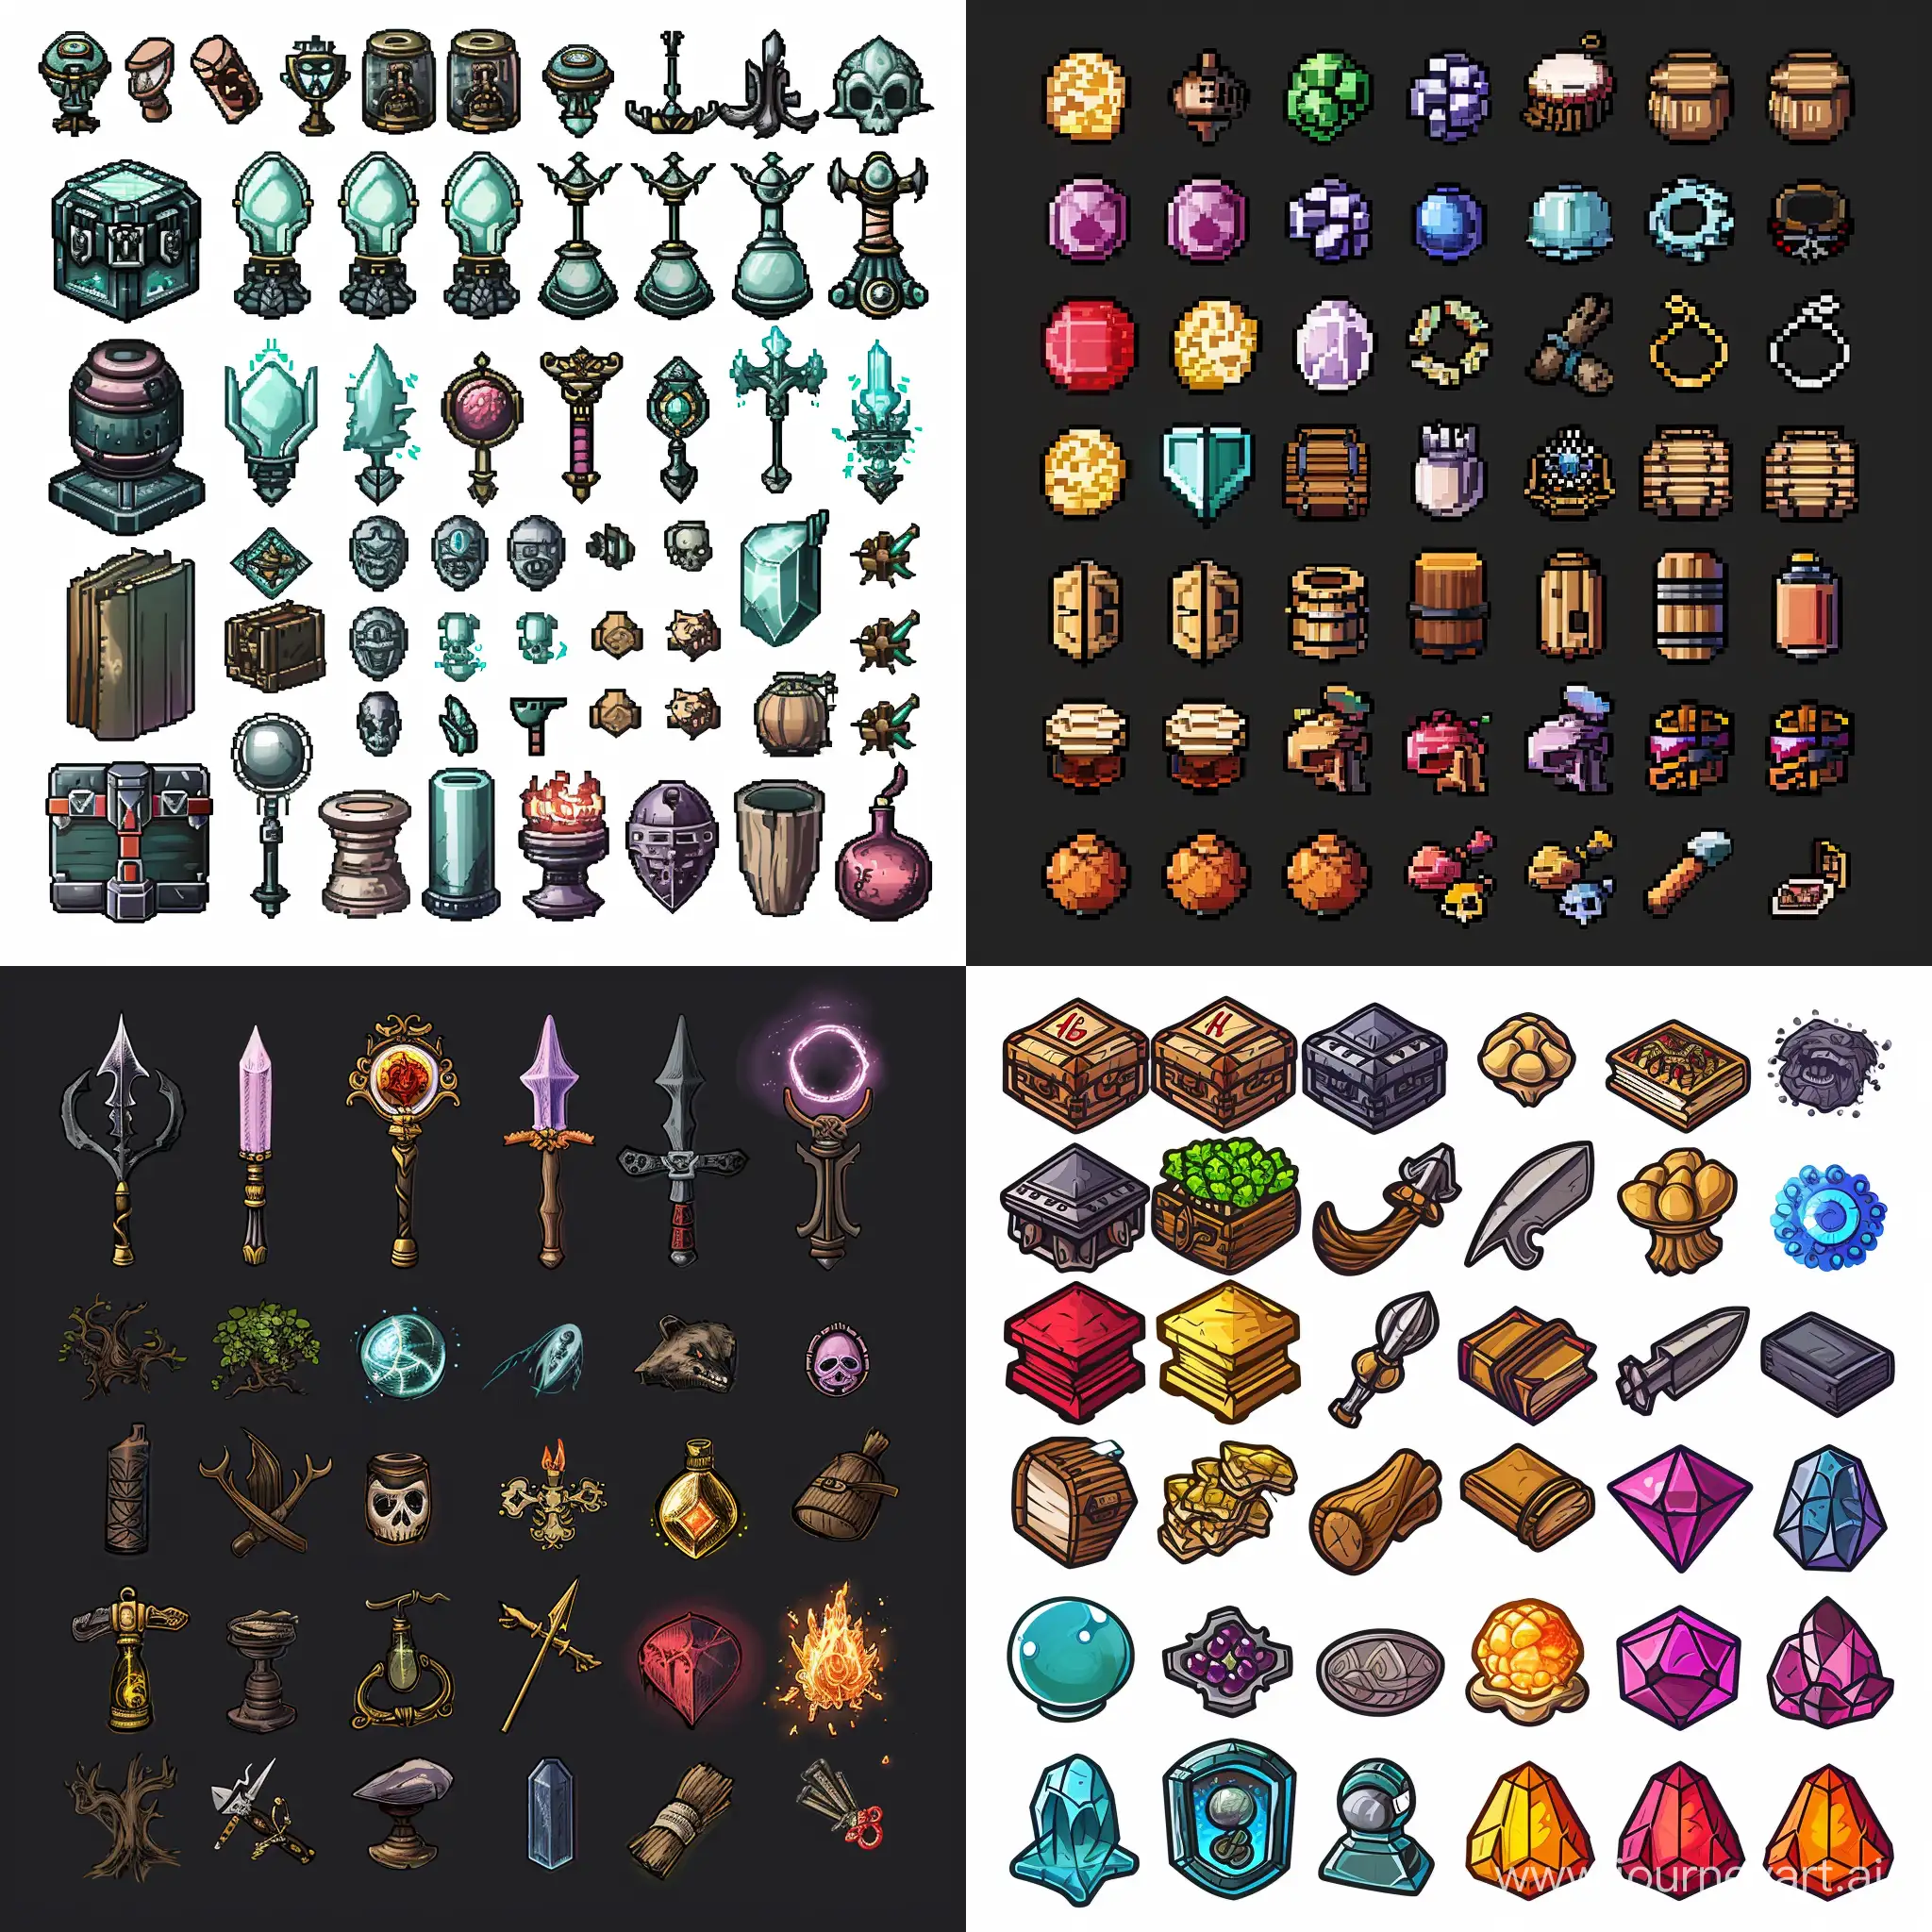 Magical-Item-Spritesheet-with-Vibrant-Effects